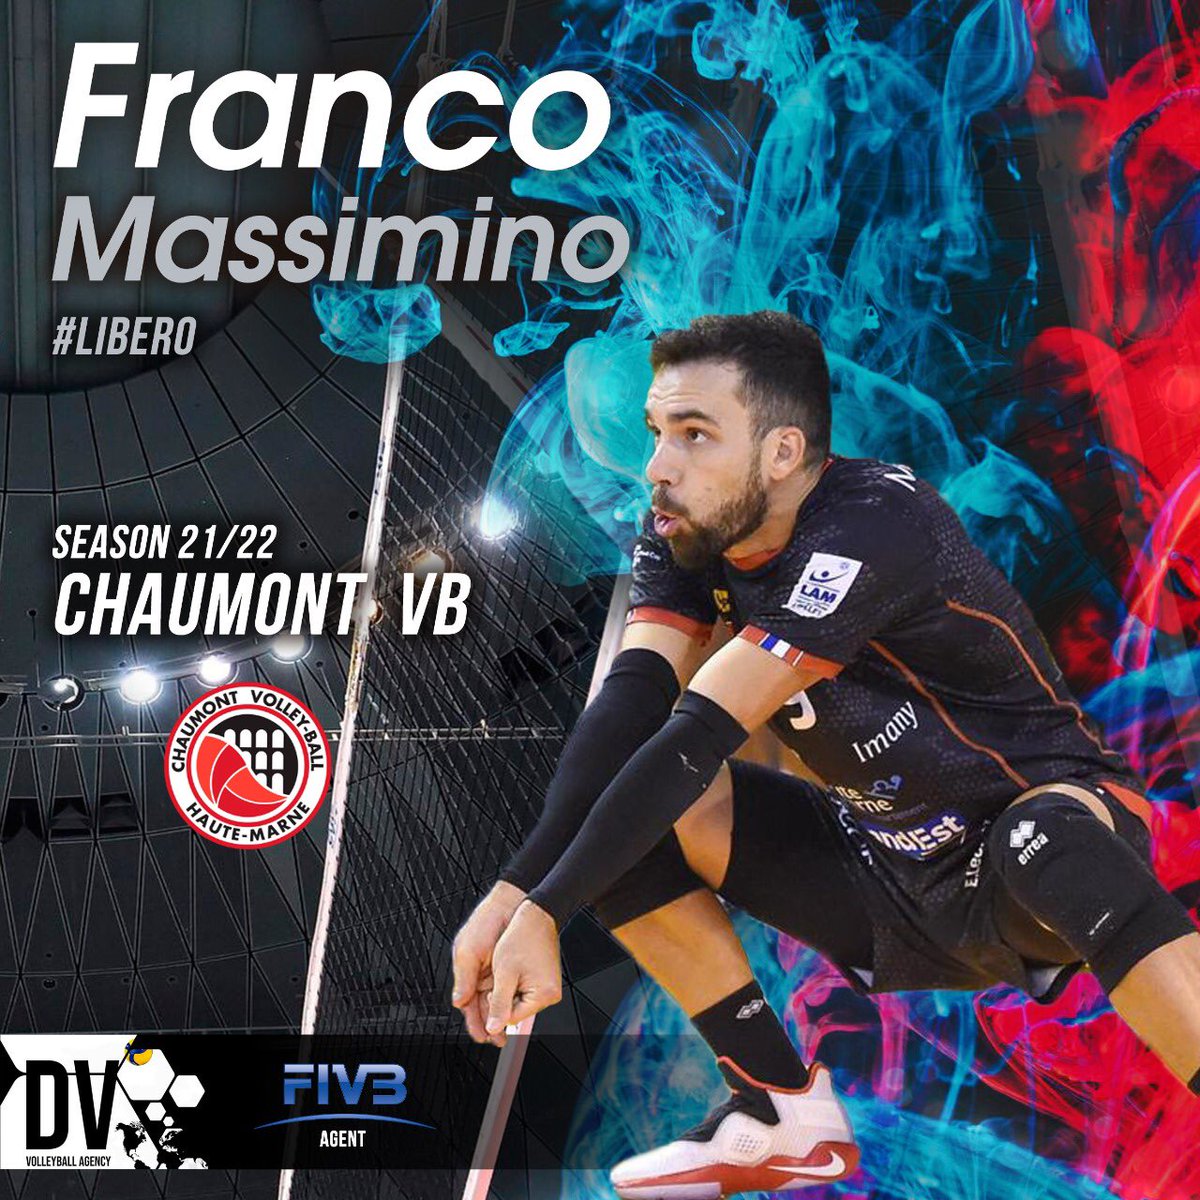 @francomassimino stamps his signature for the 3rd consecutive year with @CVB52HM !! ✍🏻🤝👊🏻🔥
.
Felicitaciones Pachi!! 
.
.
#DVAgencyTeam #transfernew #volleymercato #contract #france🇫🇷 #volleyball